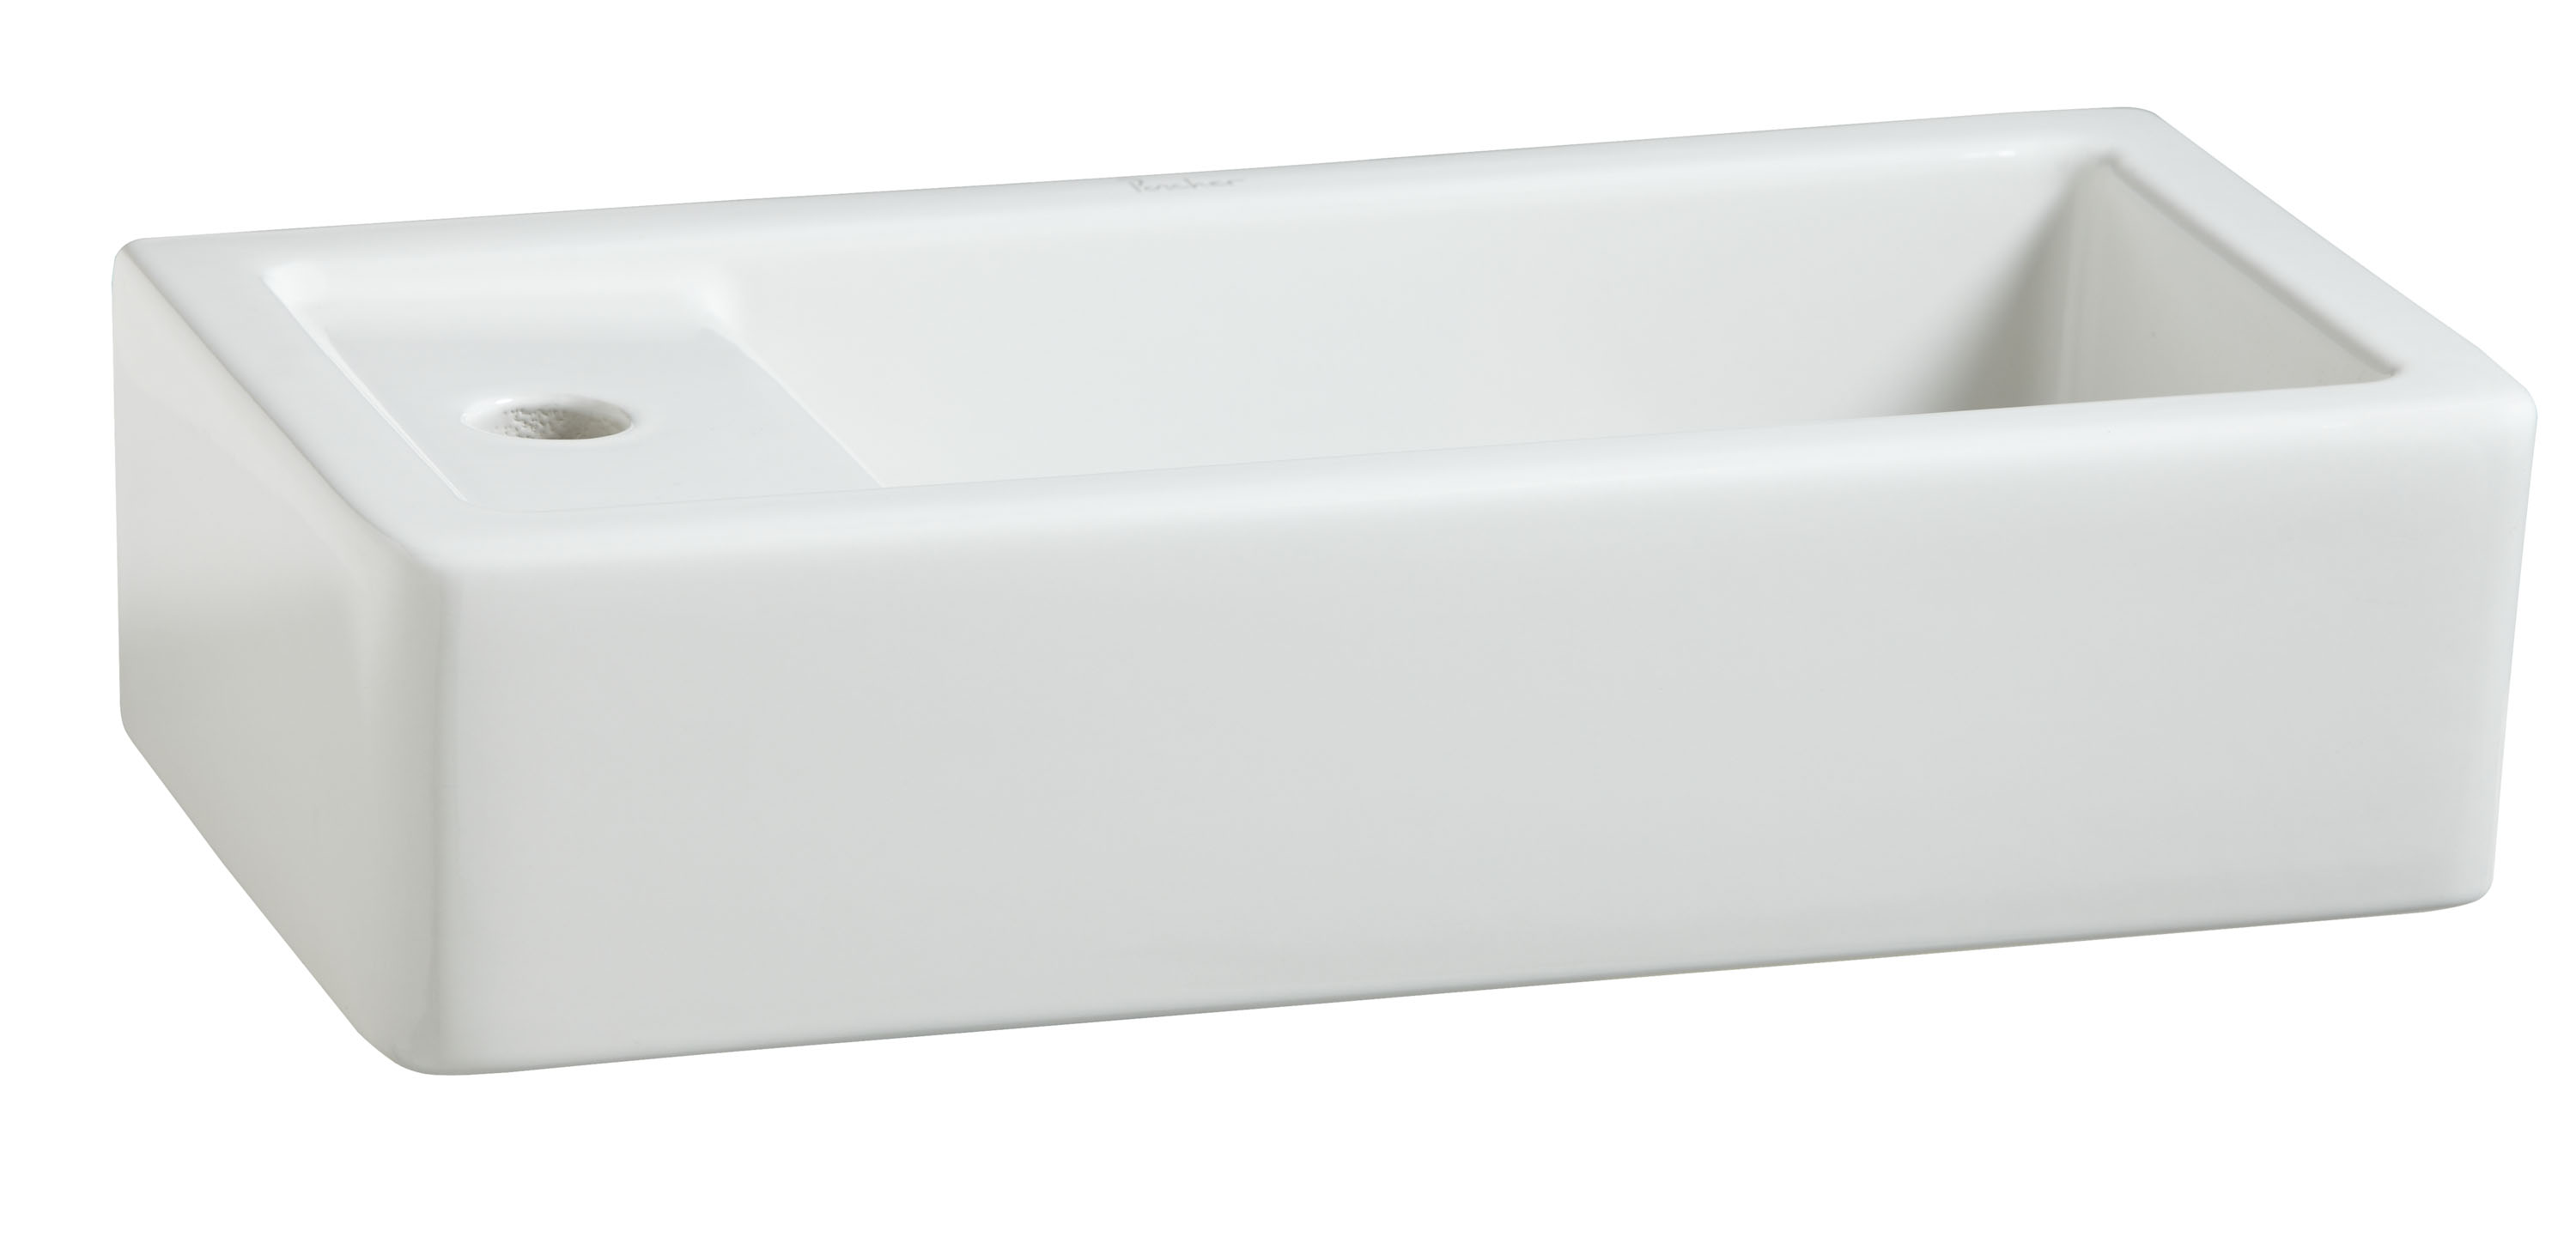 Cossu 20 in. Wall Hung Bathroom Sink, Single Hole with Left Hand Drain